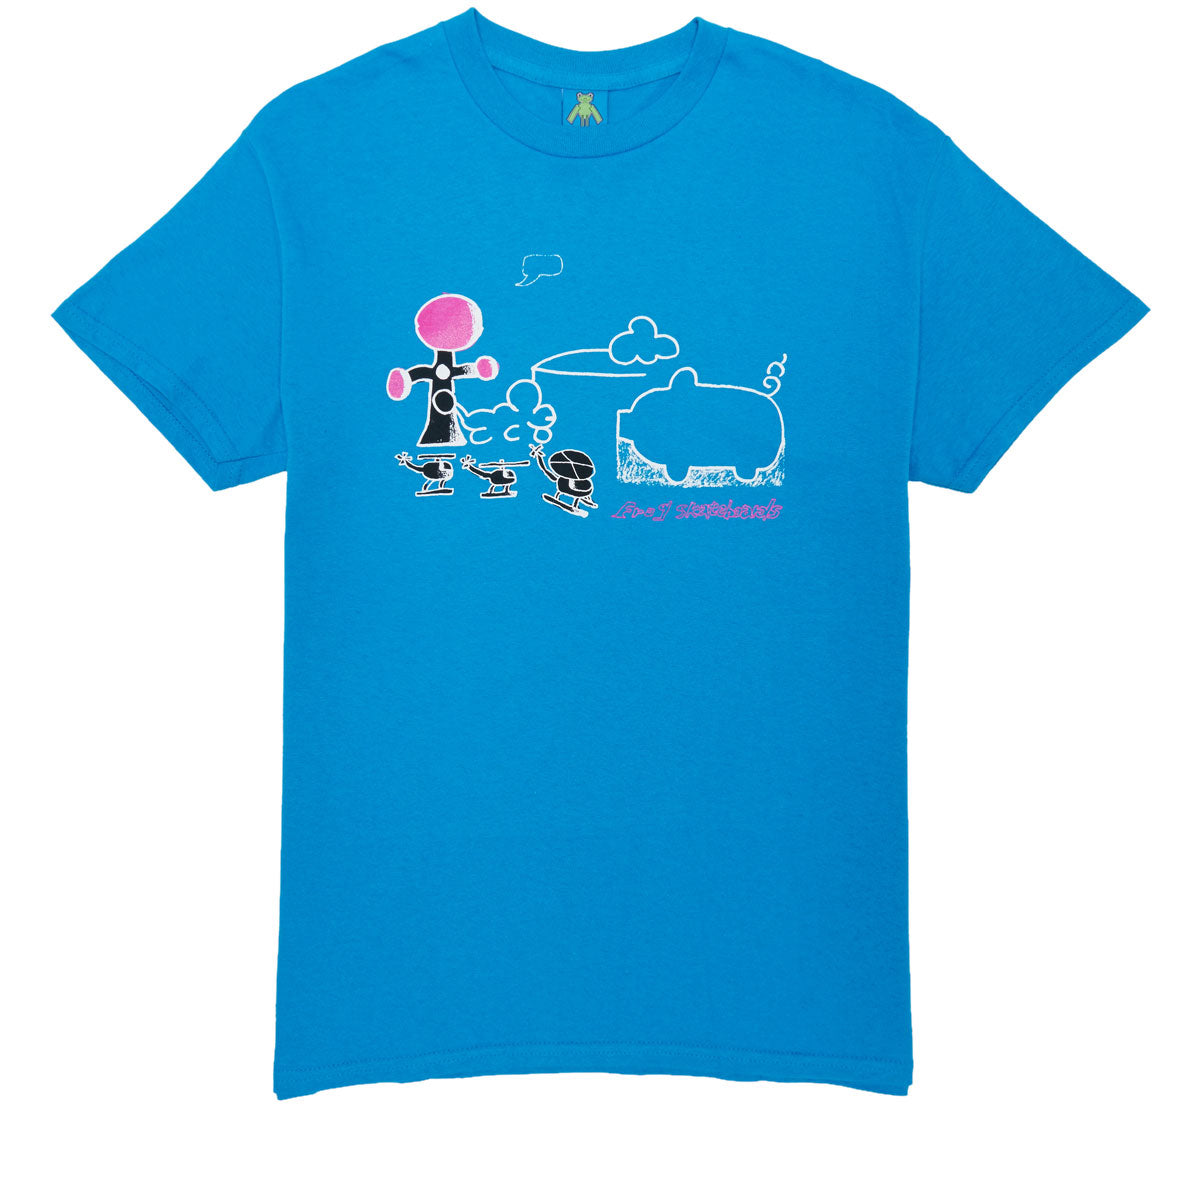 Frog Cloud Landed T-Shirt - Turquoise image 1